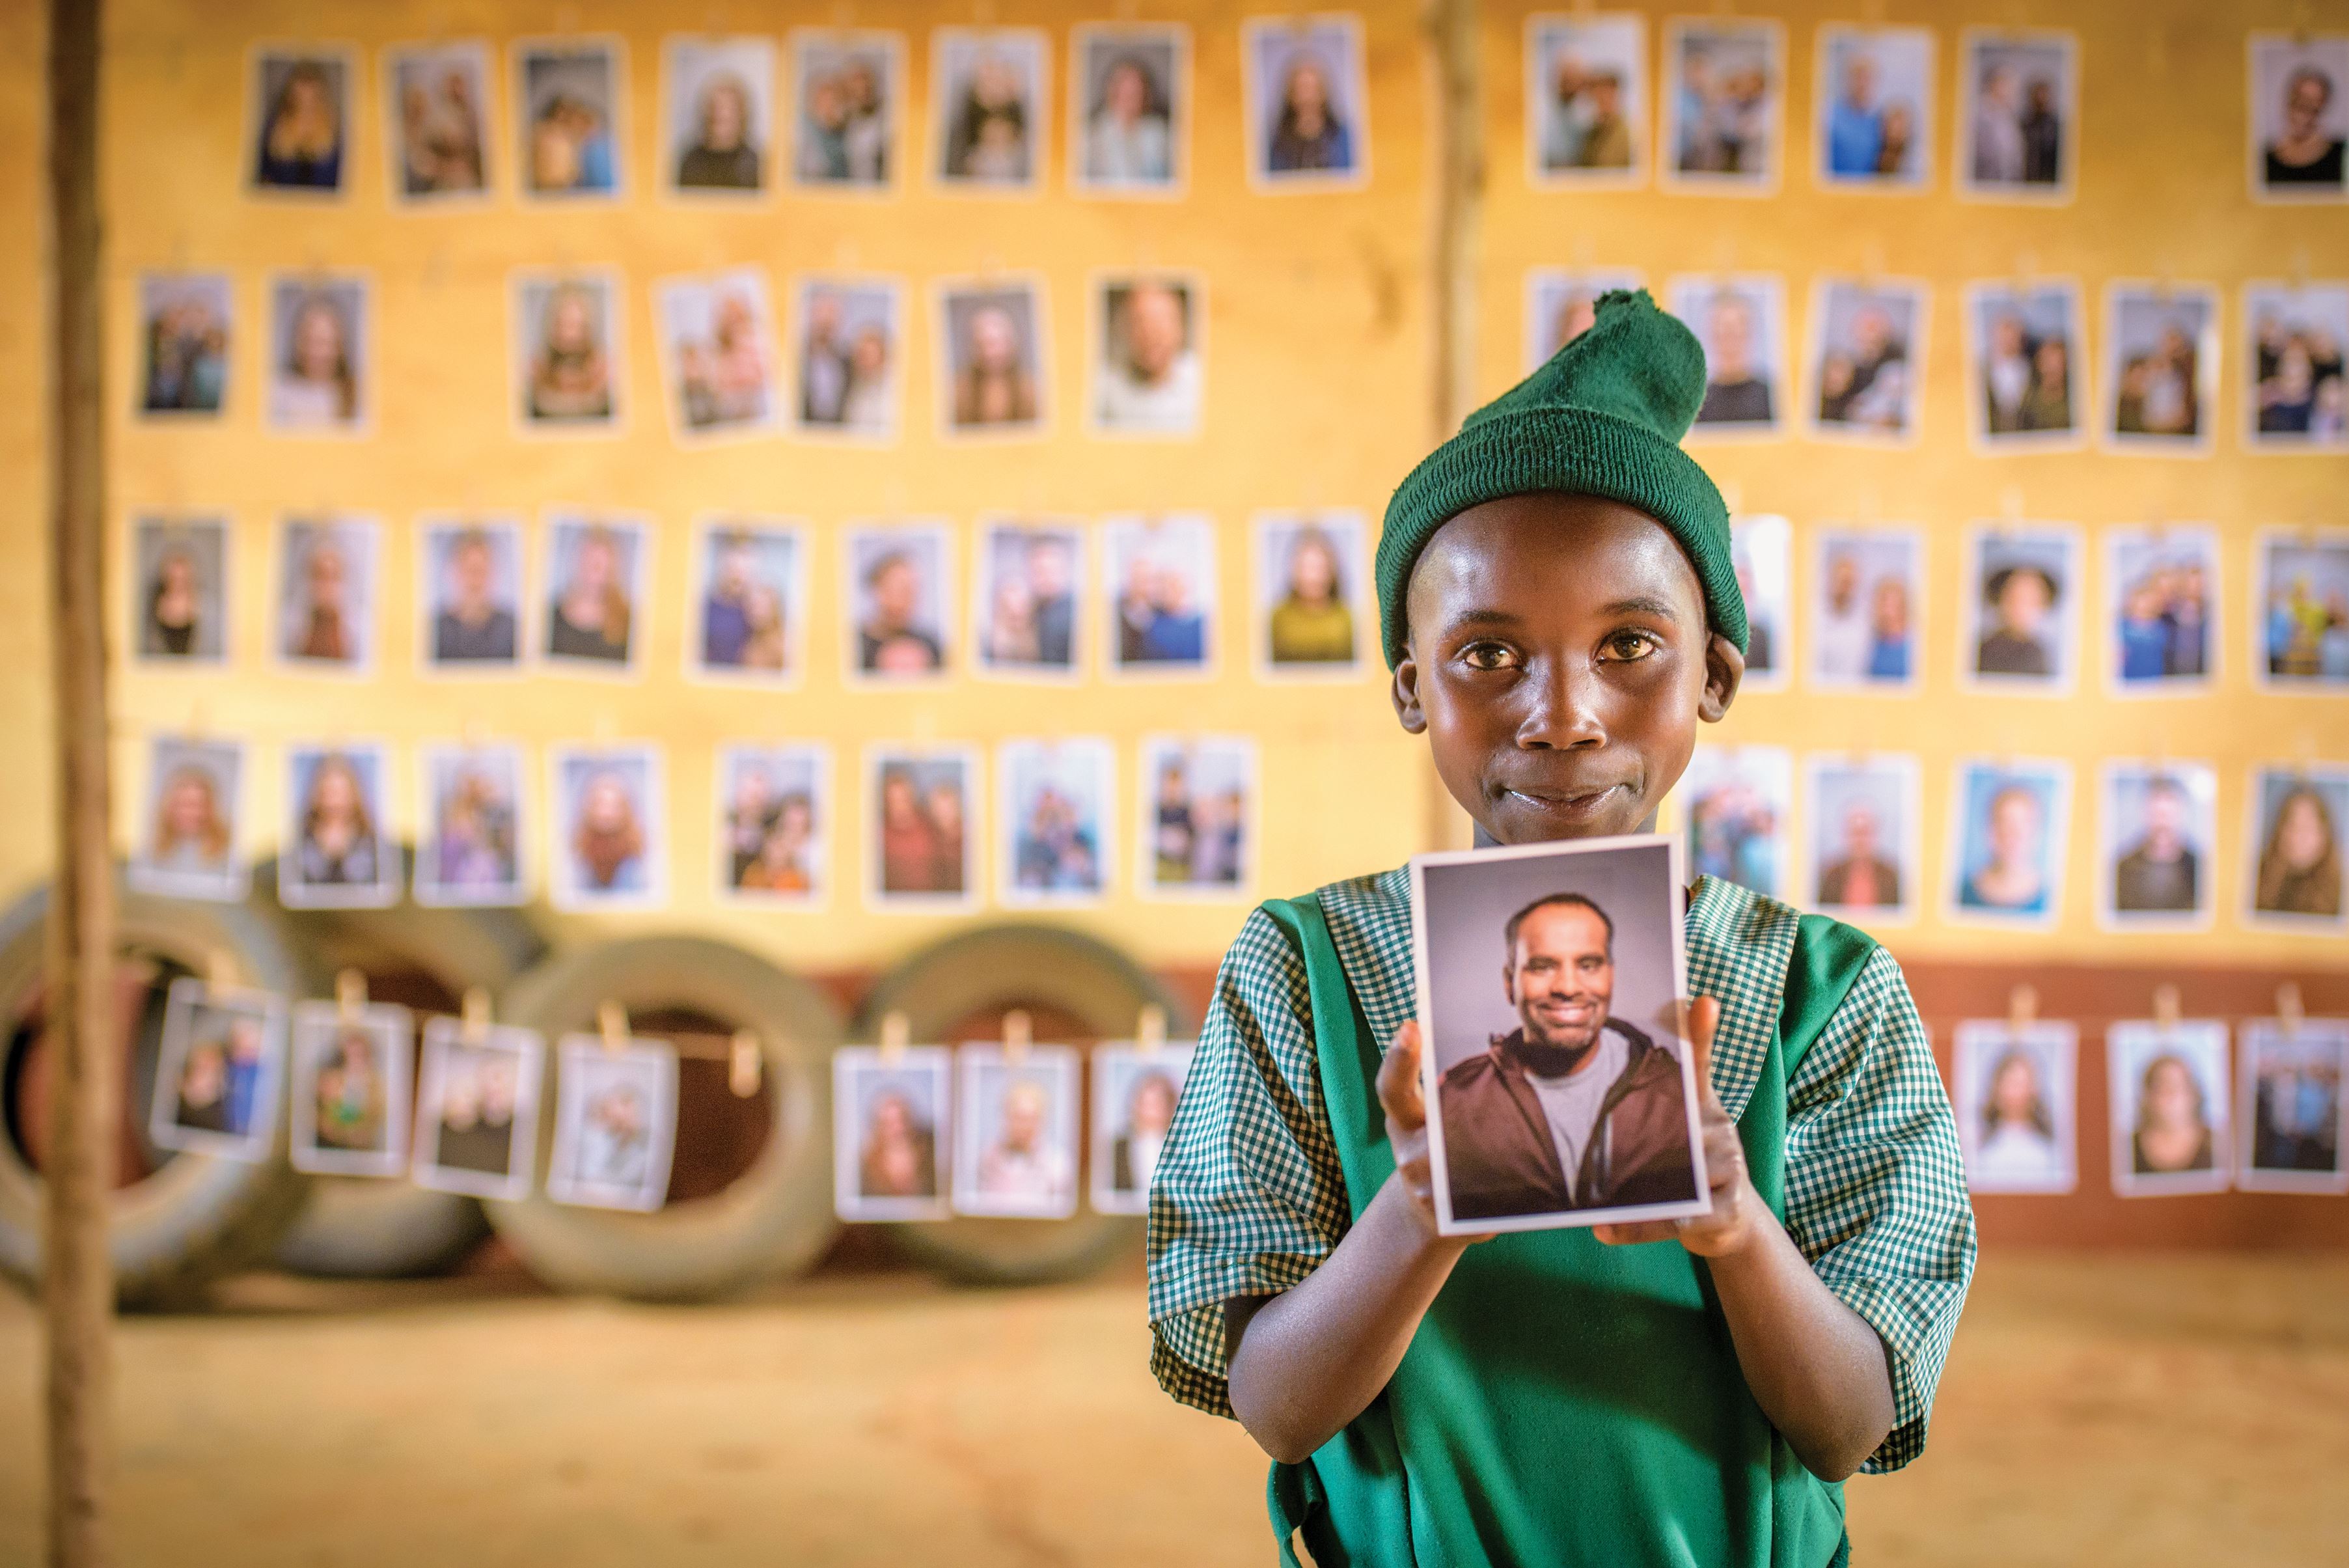 Young girl smiles and holds up photo of sponsors she has chosen